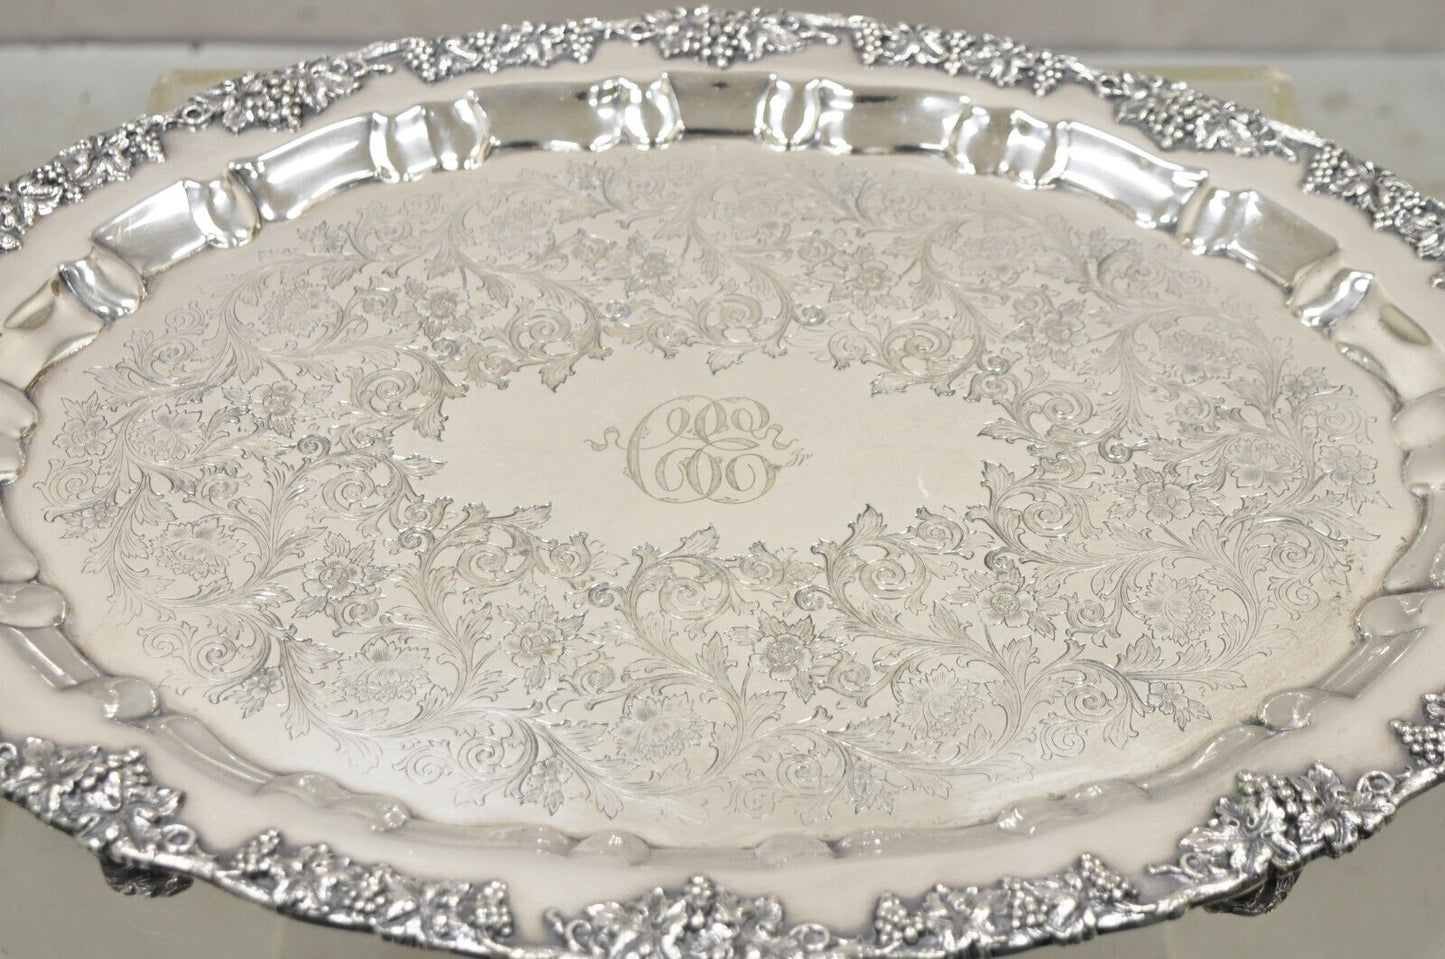 Antique English Victorian Silver Plated Ornate Grapevine Serving Platter Tray